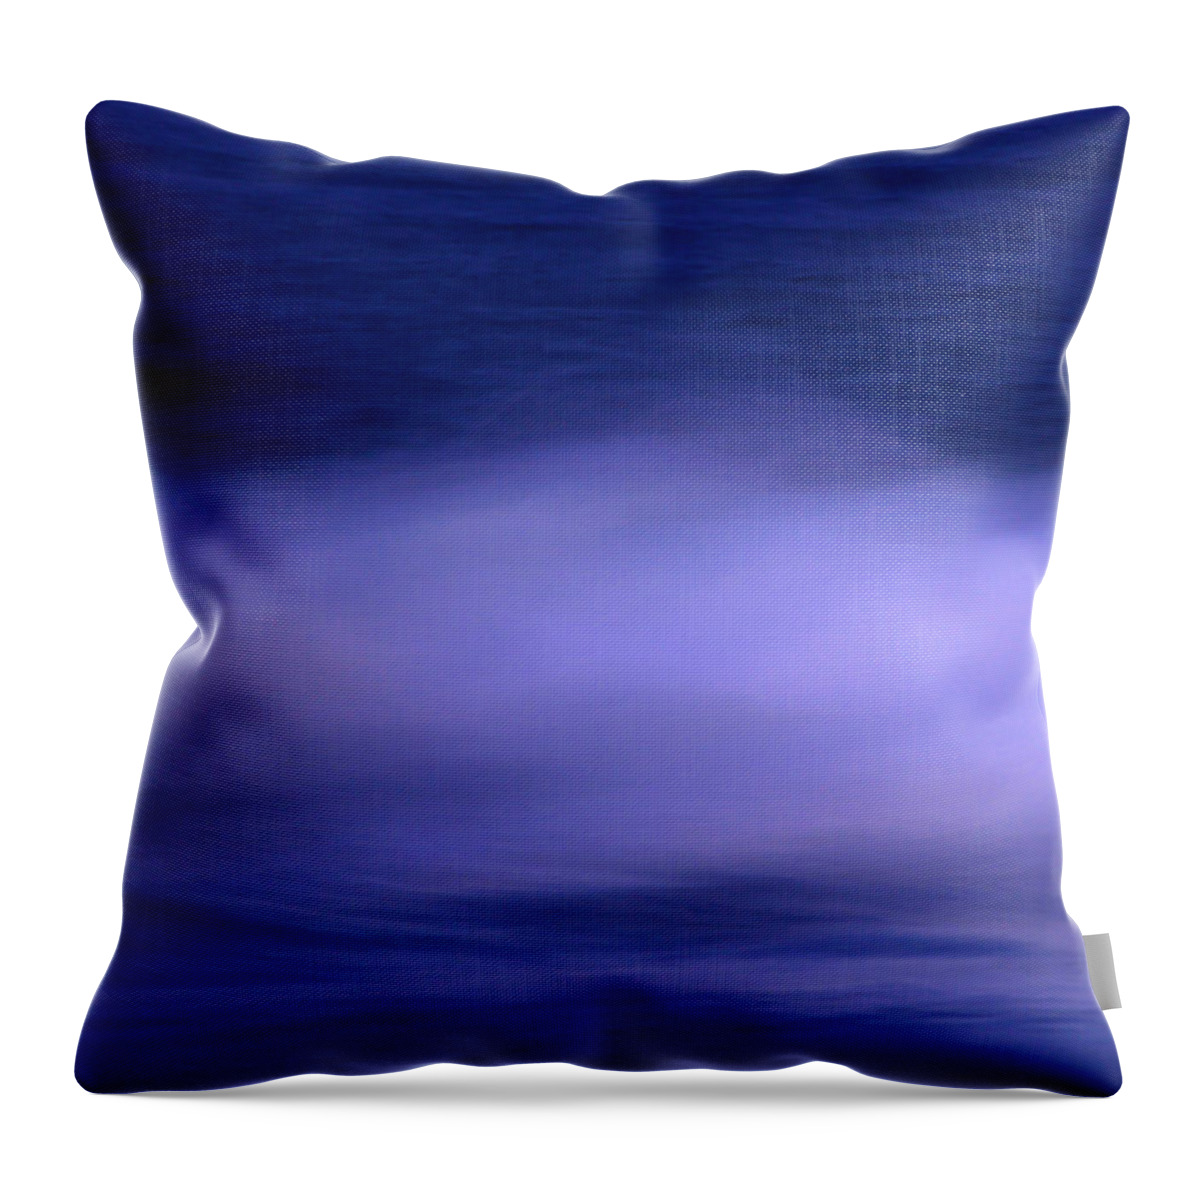 Sea Throw Pillow featuring the photograph The Red Moon And The Sea by Hannes Cmarits